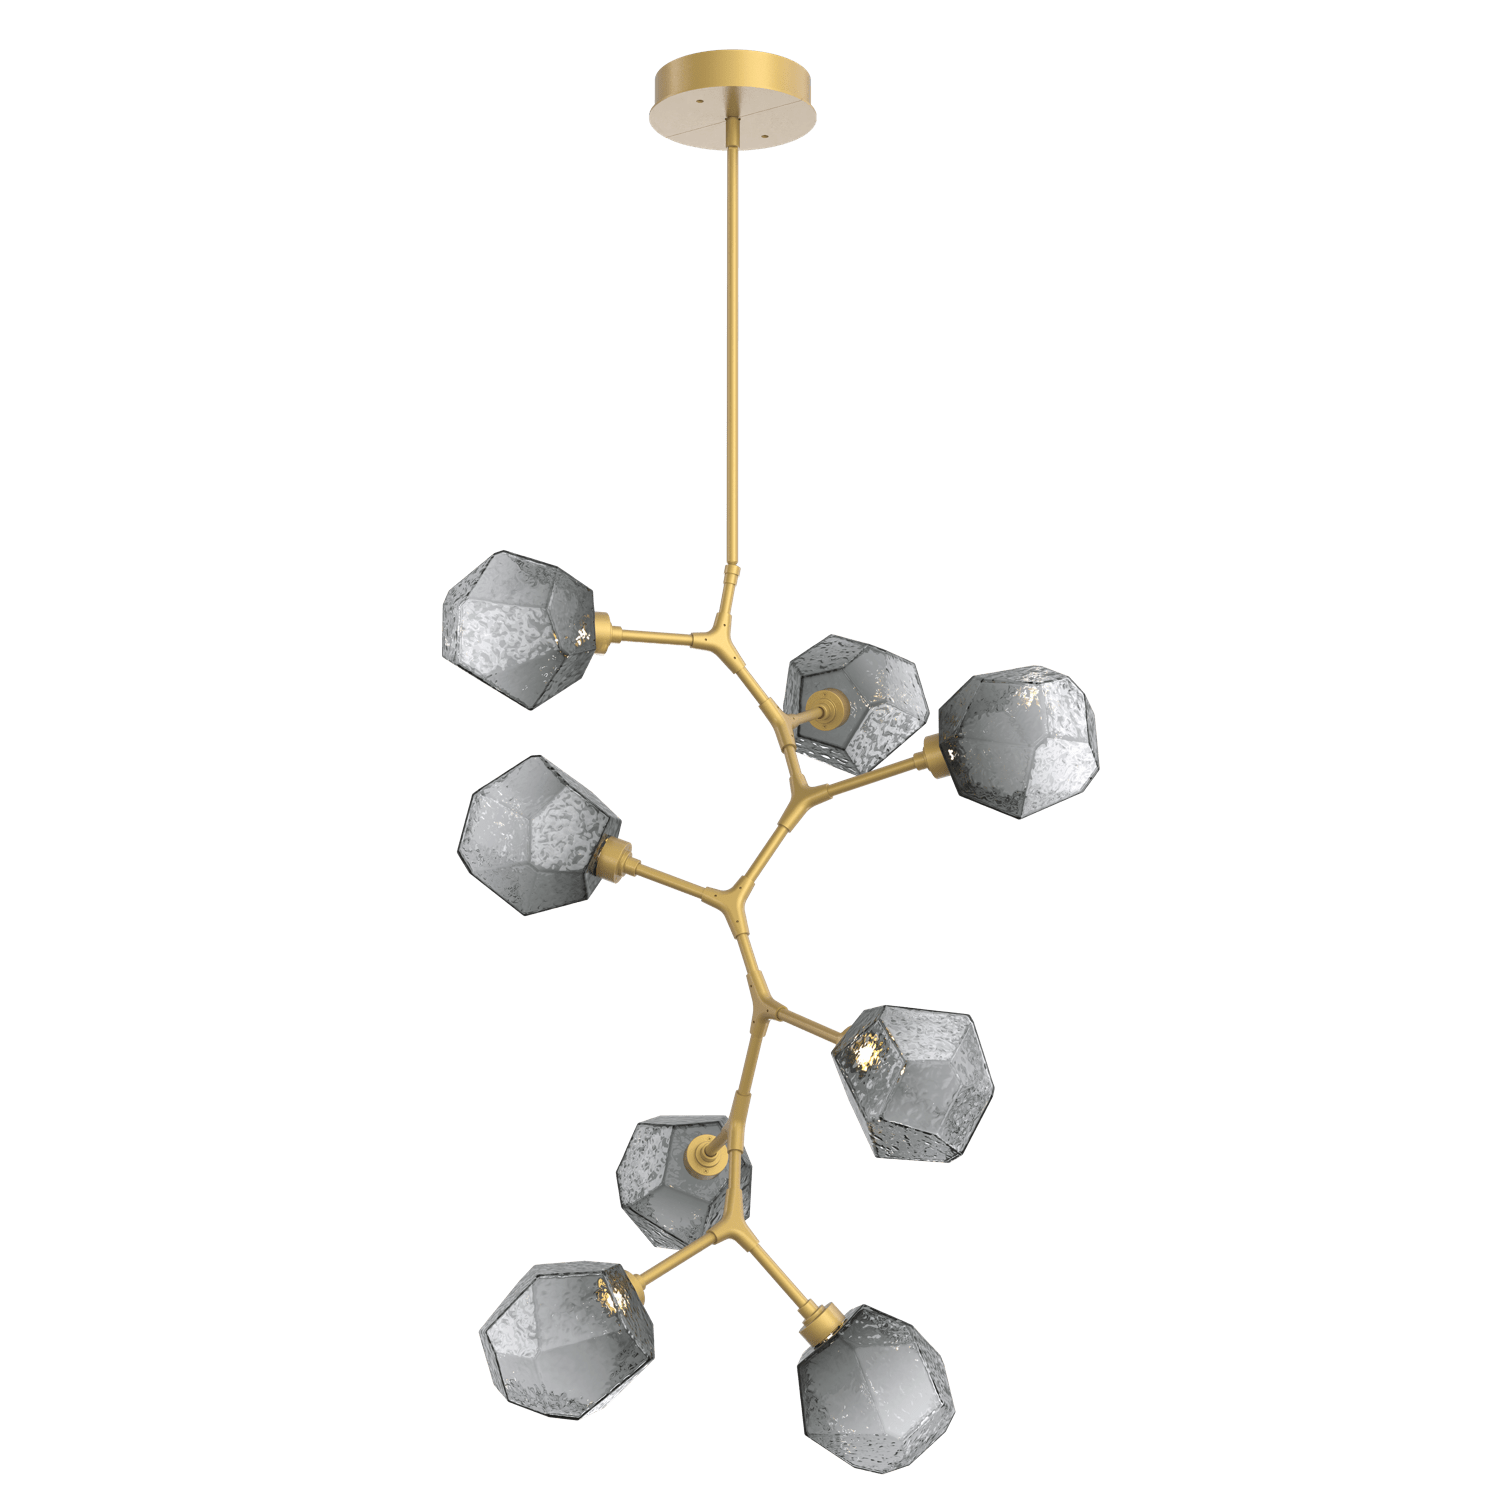 CHB0039-VB-GB-S-Hammerton-Studio-Gem-8-light-modern-vine-chandelier-with-gilded-brass-finish-and-smoke-blown-glass-shades-and-LED-lamping